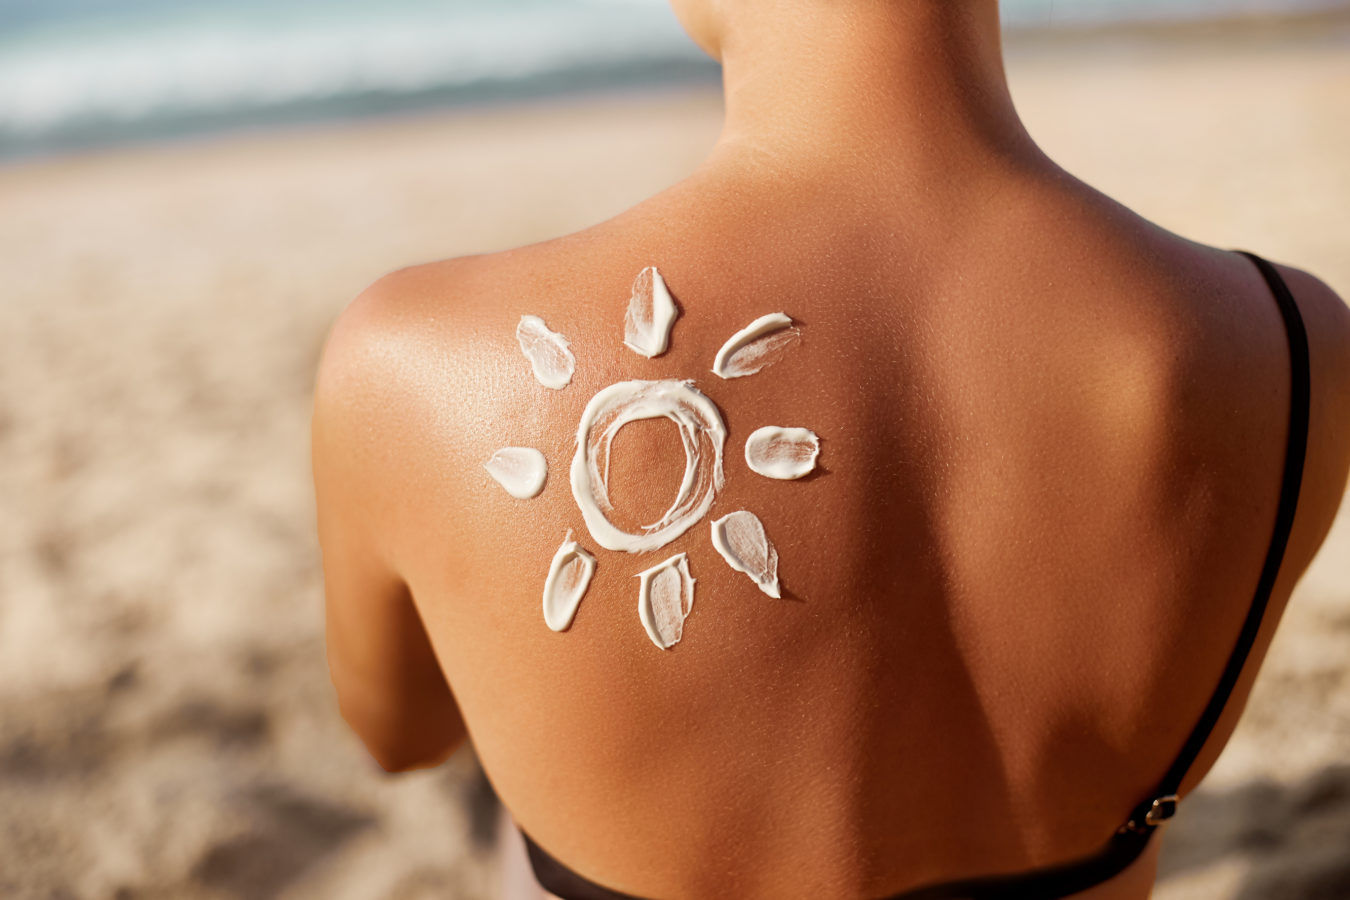 12 best sunscreens for oily skin that won’t clog pores